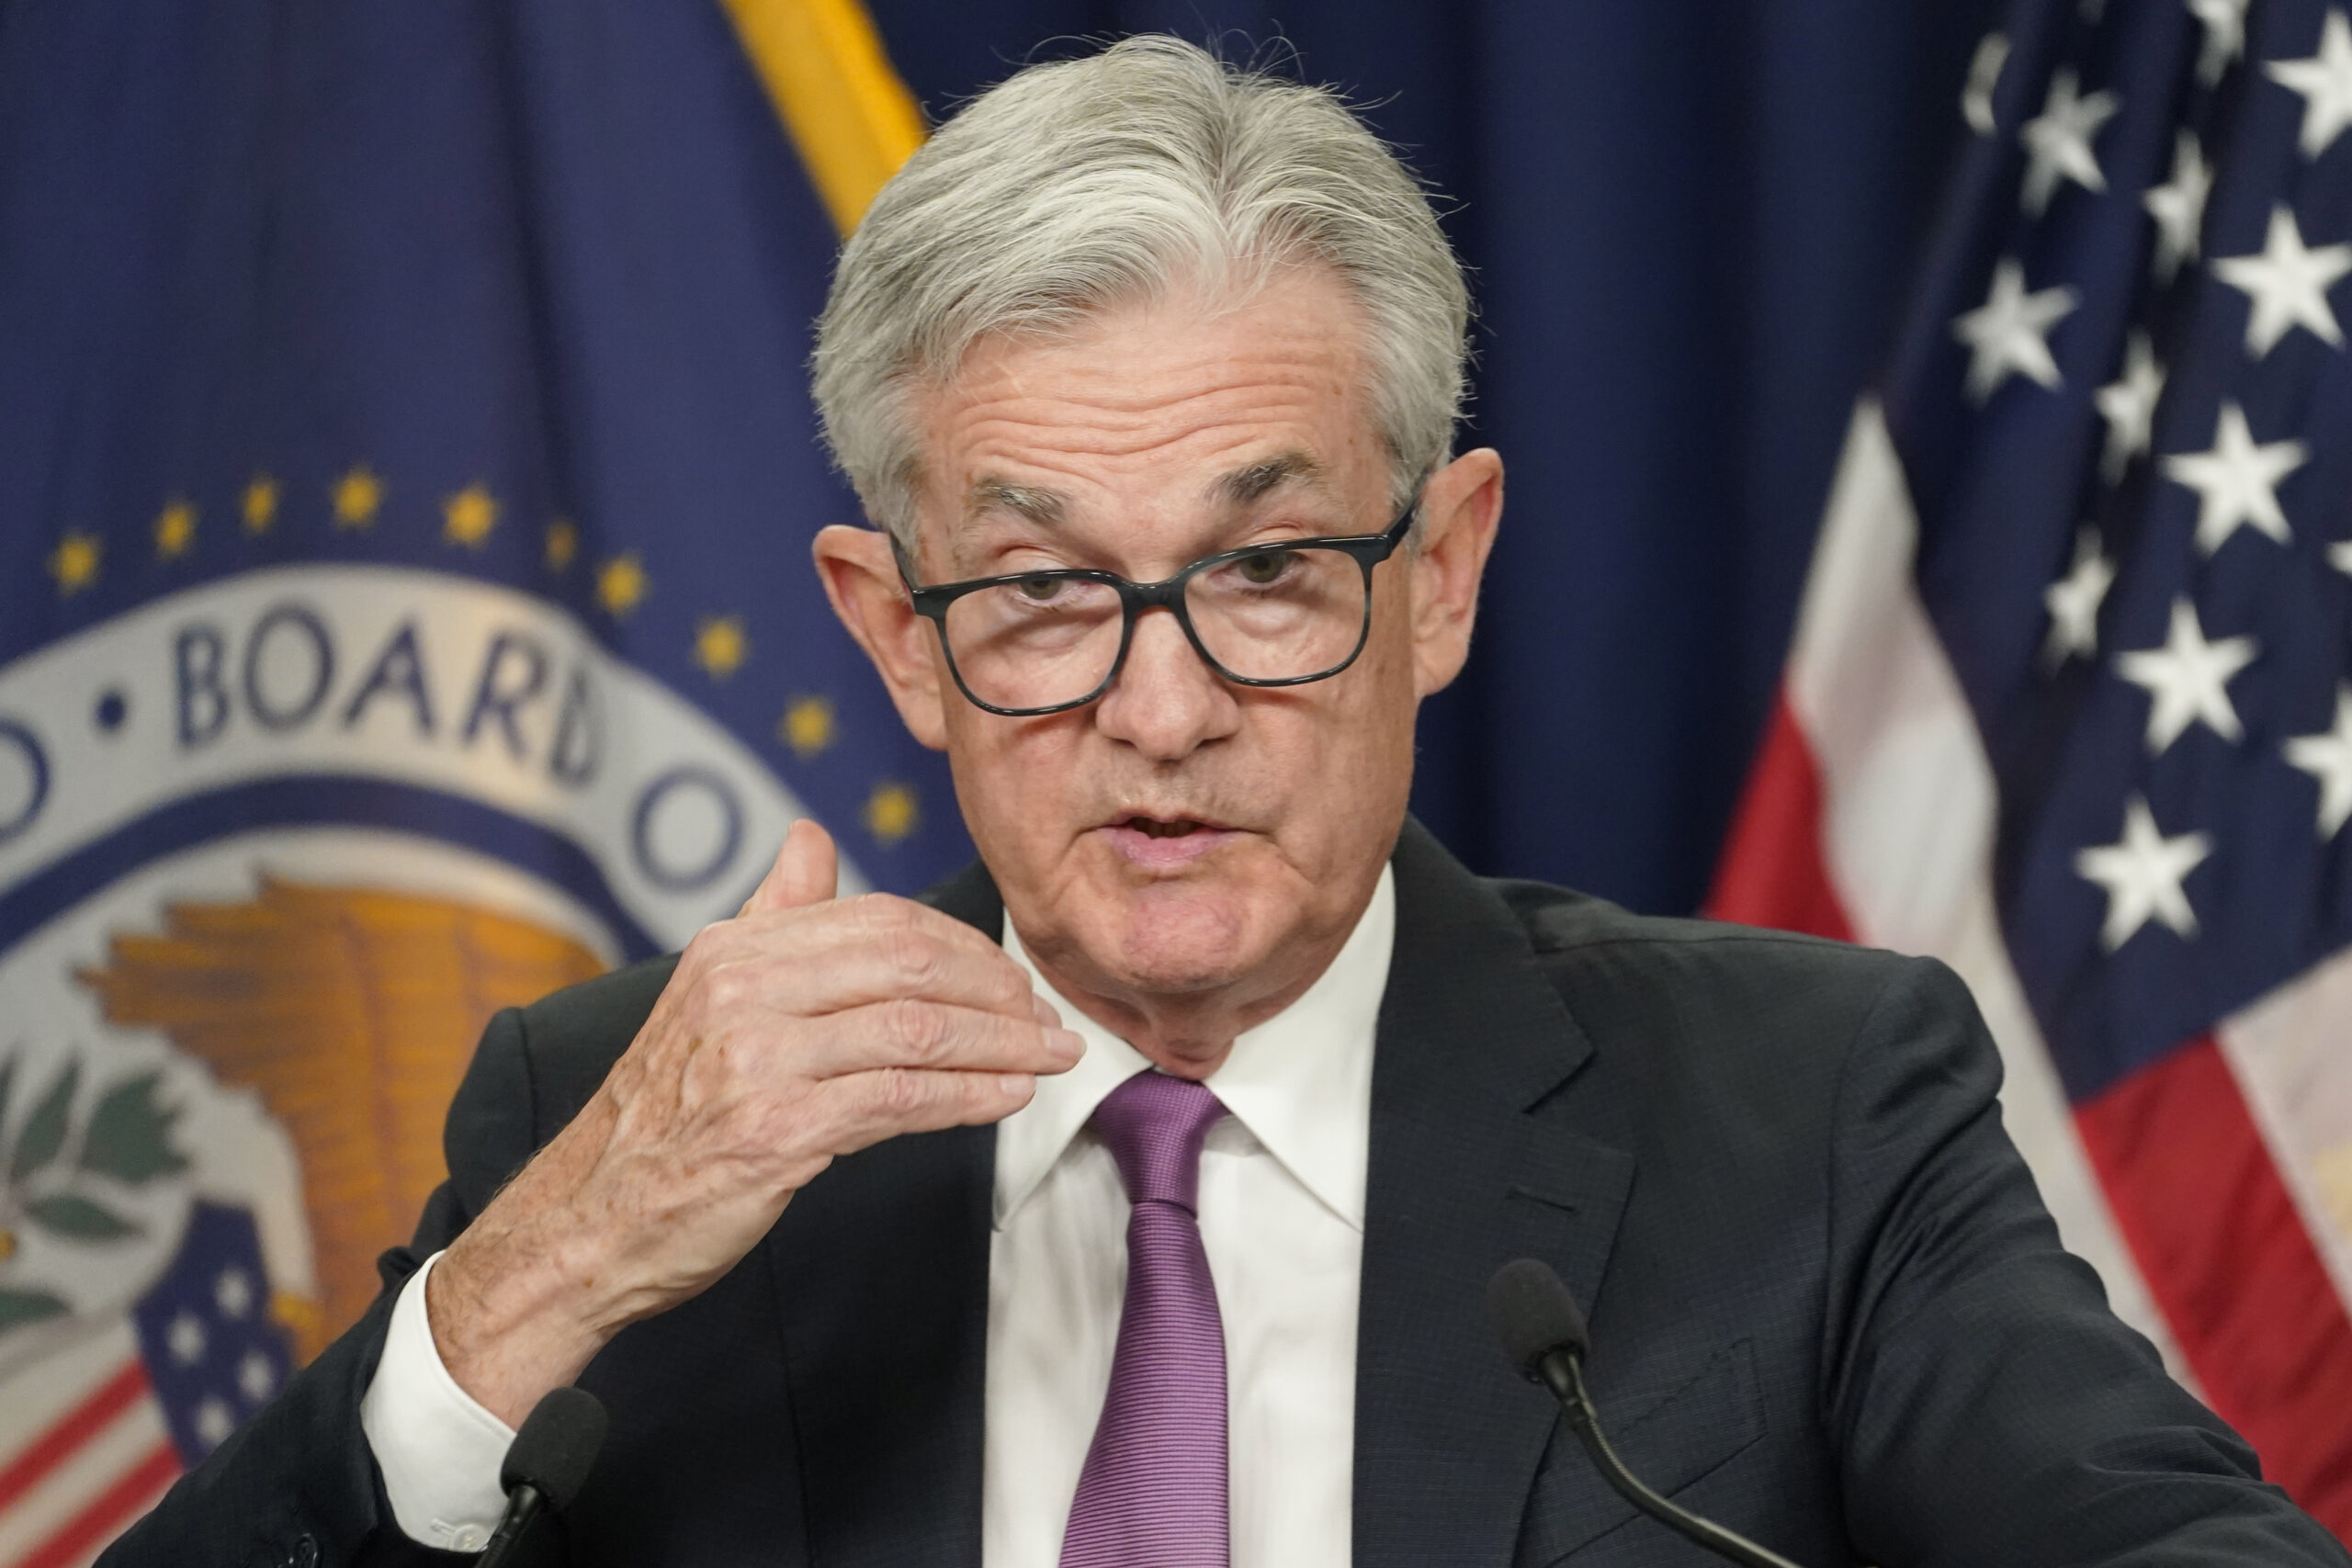 Federal Reserve Chairman Jerome Powell speaks during a news conference at the Federal Reserve Board building in Washington, Wednesday, July 27, 2022. (AP Photo/Manuel Balce Ceneta)